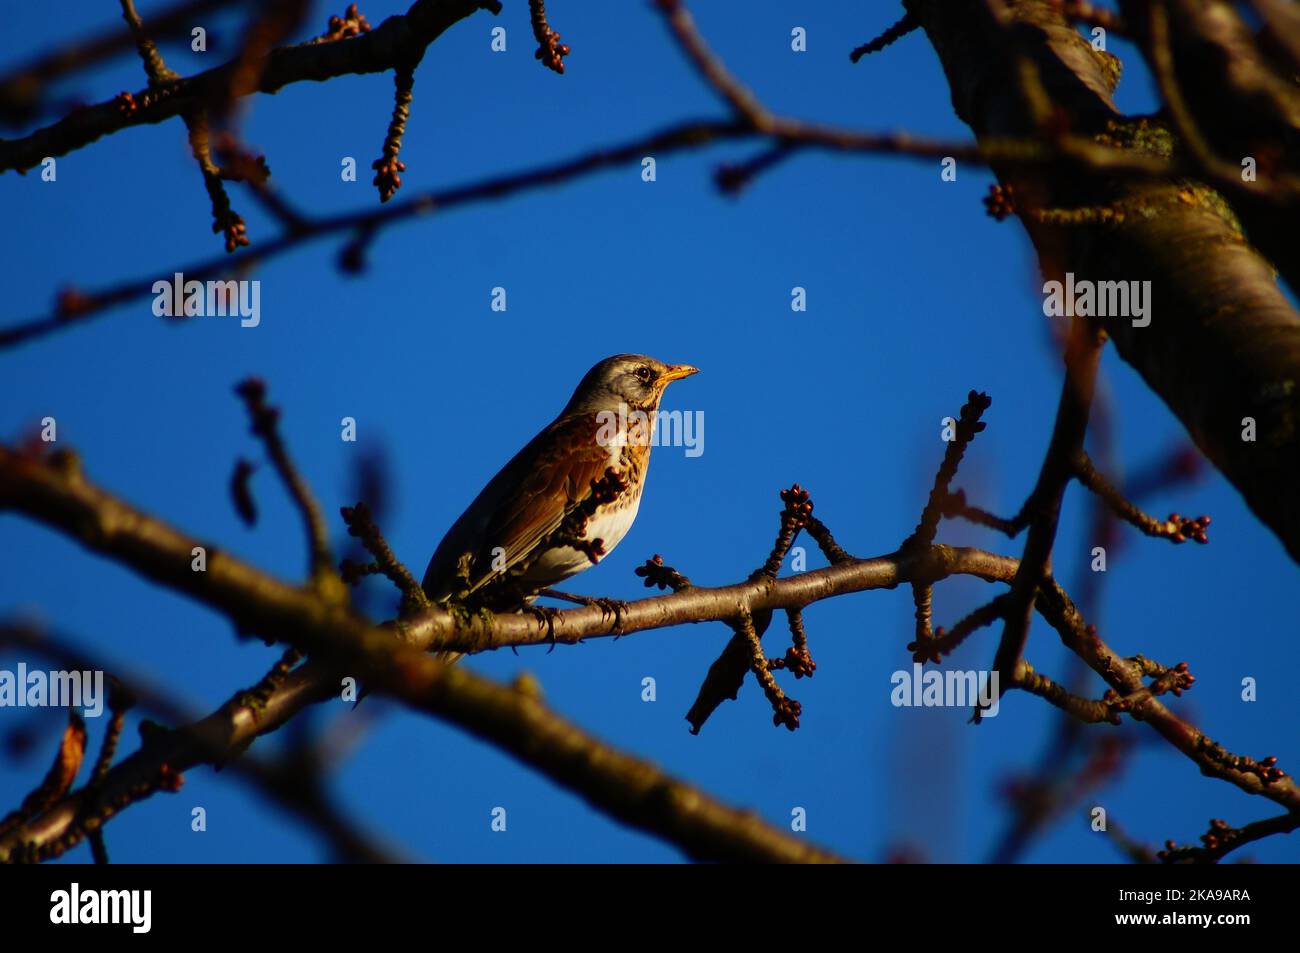 A fieldfare in the evening light in a cherry tree in February against a blue sky. The colours blur and the camouflage seems perfect. Stock Photo